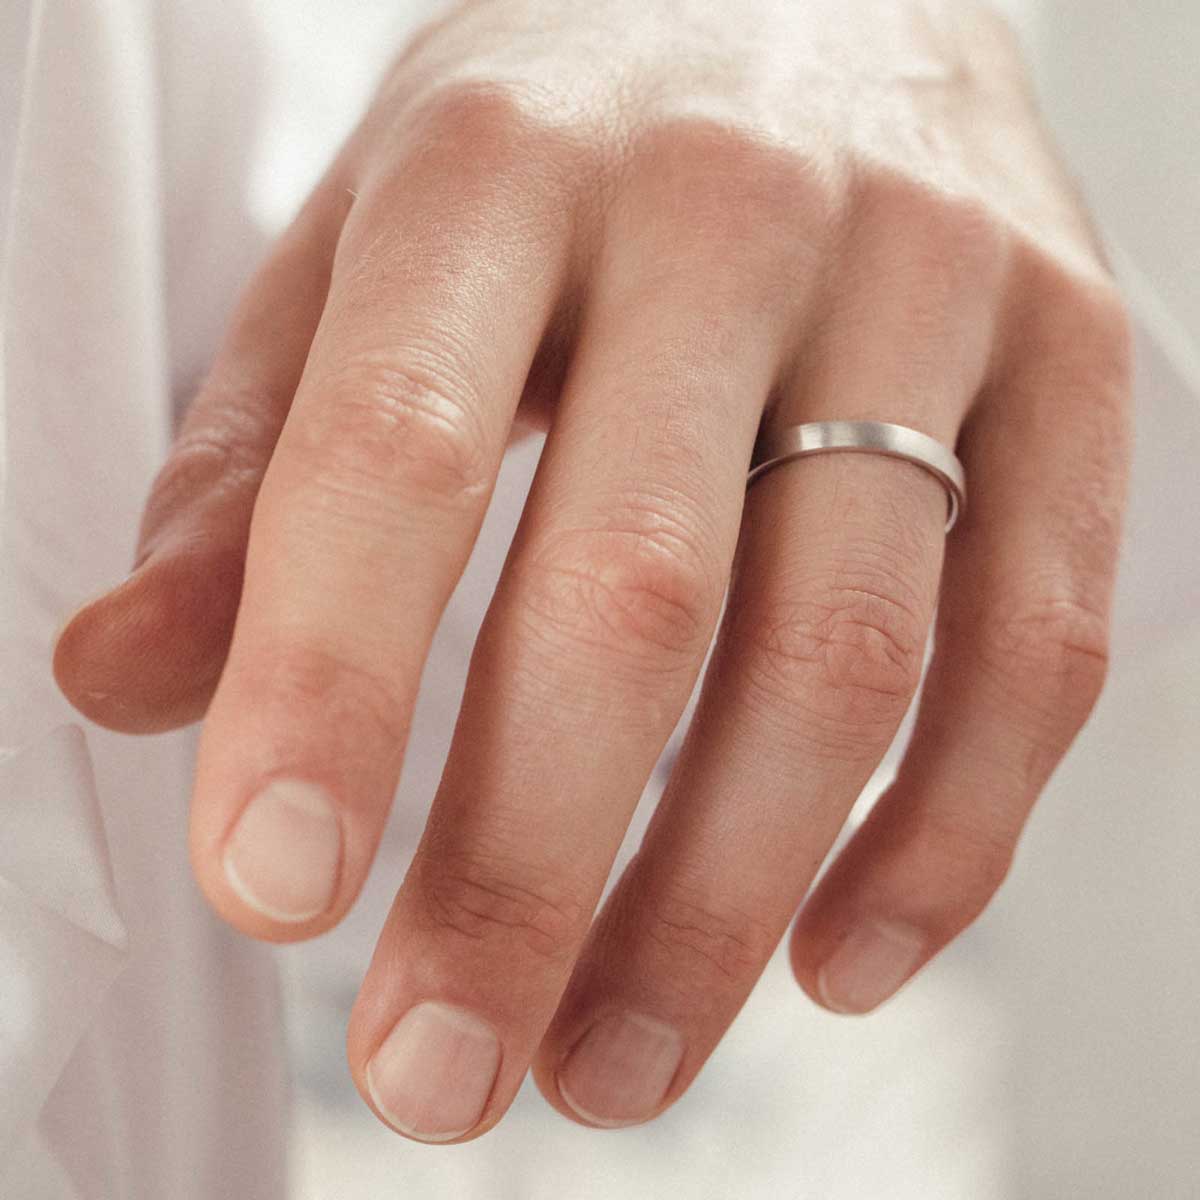 6 Types of Rings Every Classy Fashionable Woman Should Own